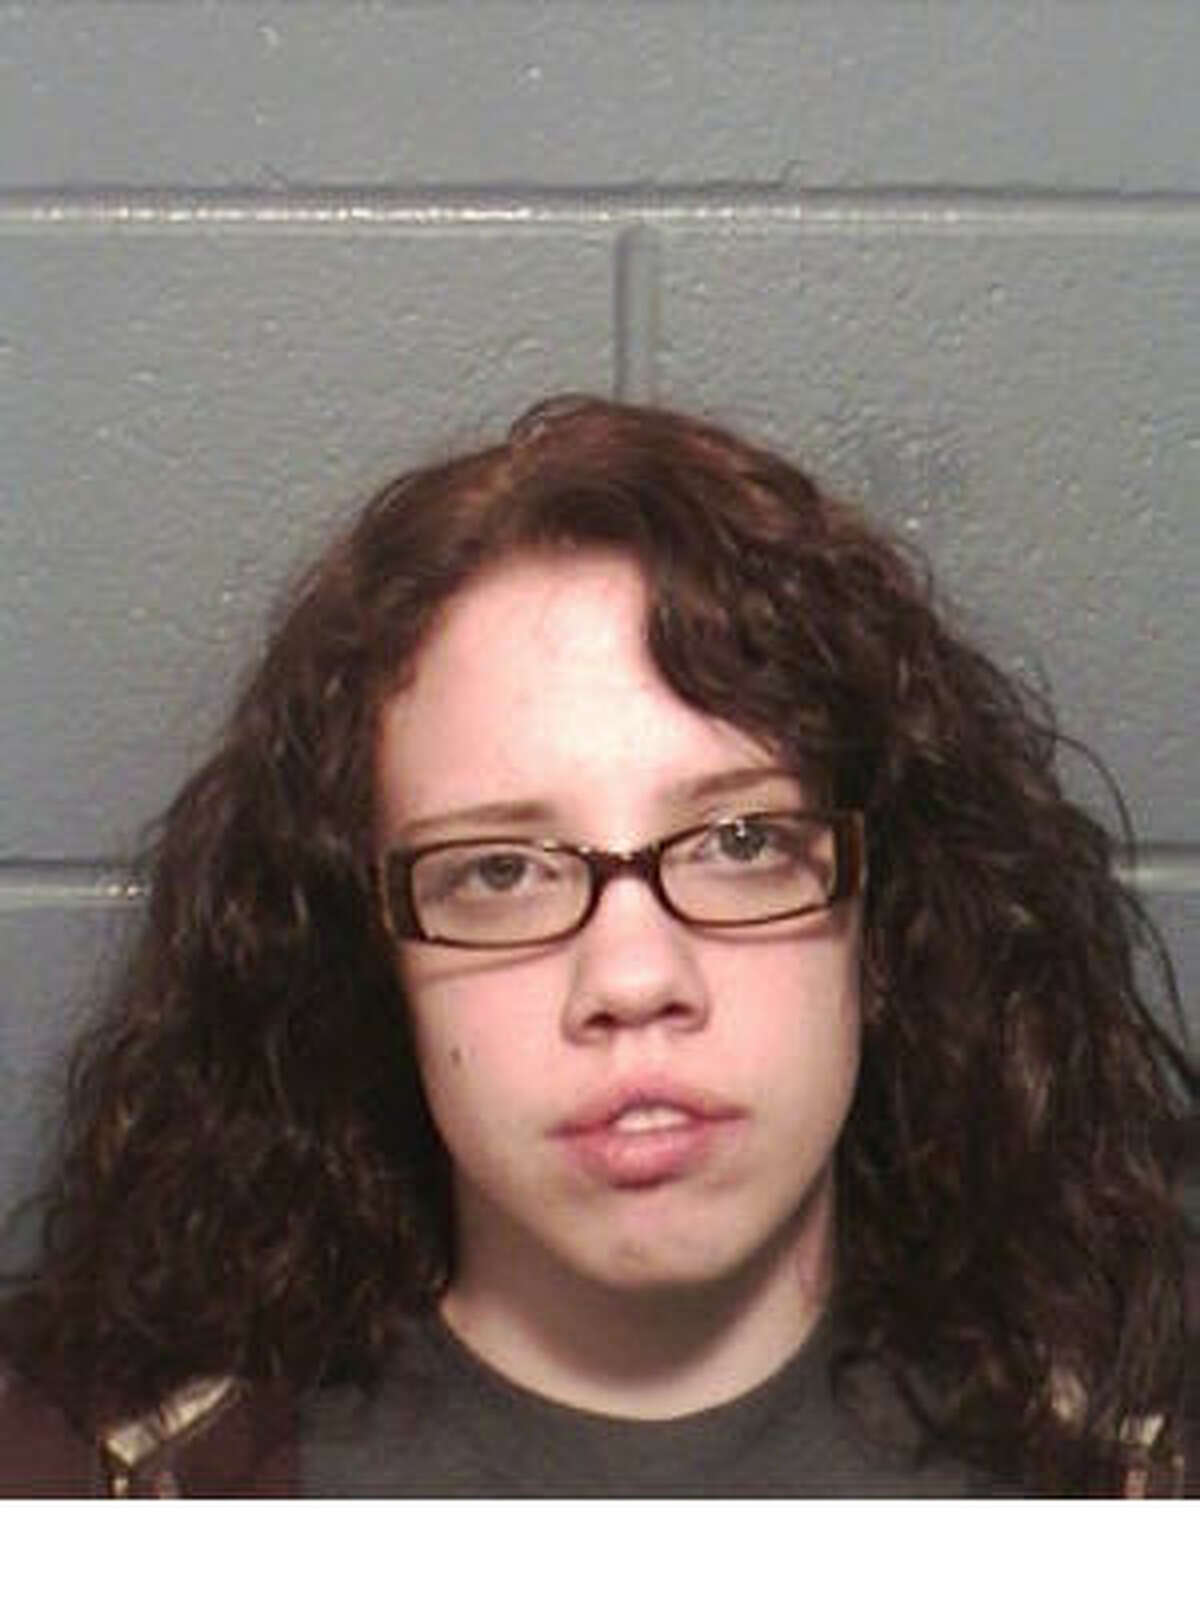 Anika Roe Johnson, 22, is due in court Friday on a charge of injury to a child by omission.